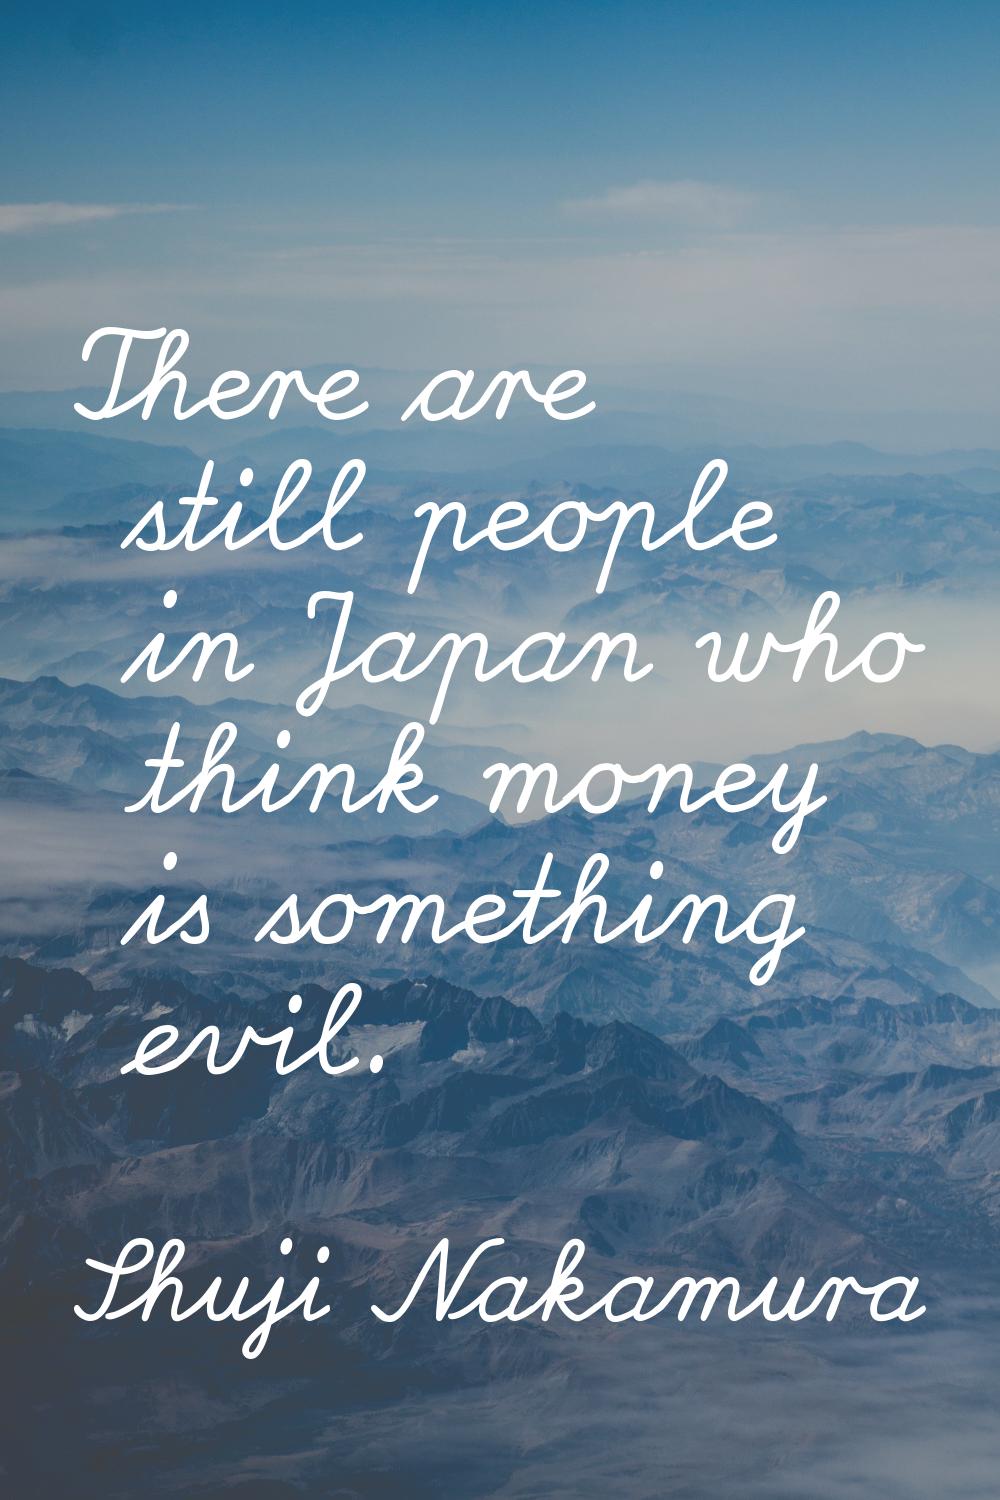 There are still people in Japan who think money is something evil.